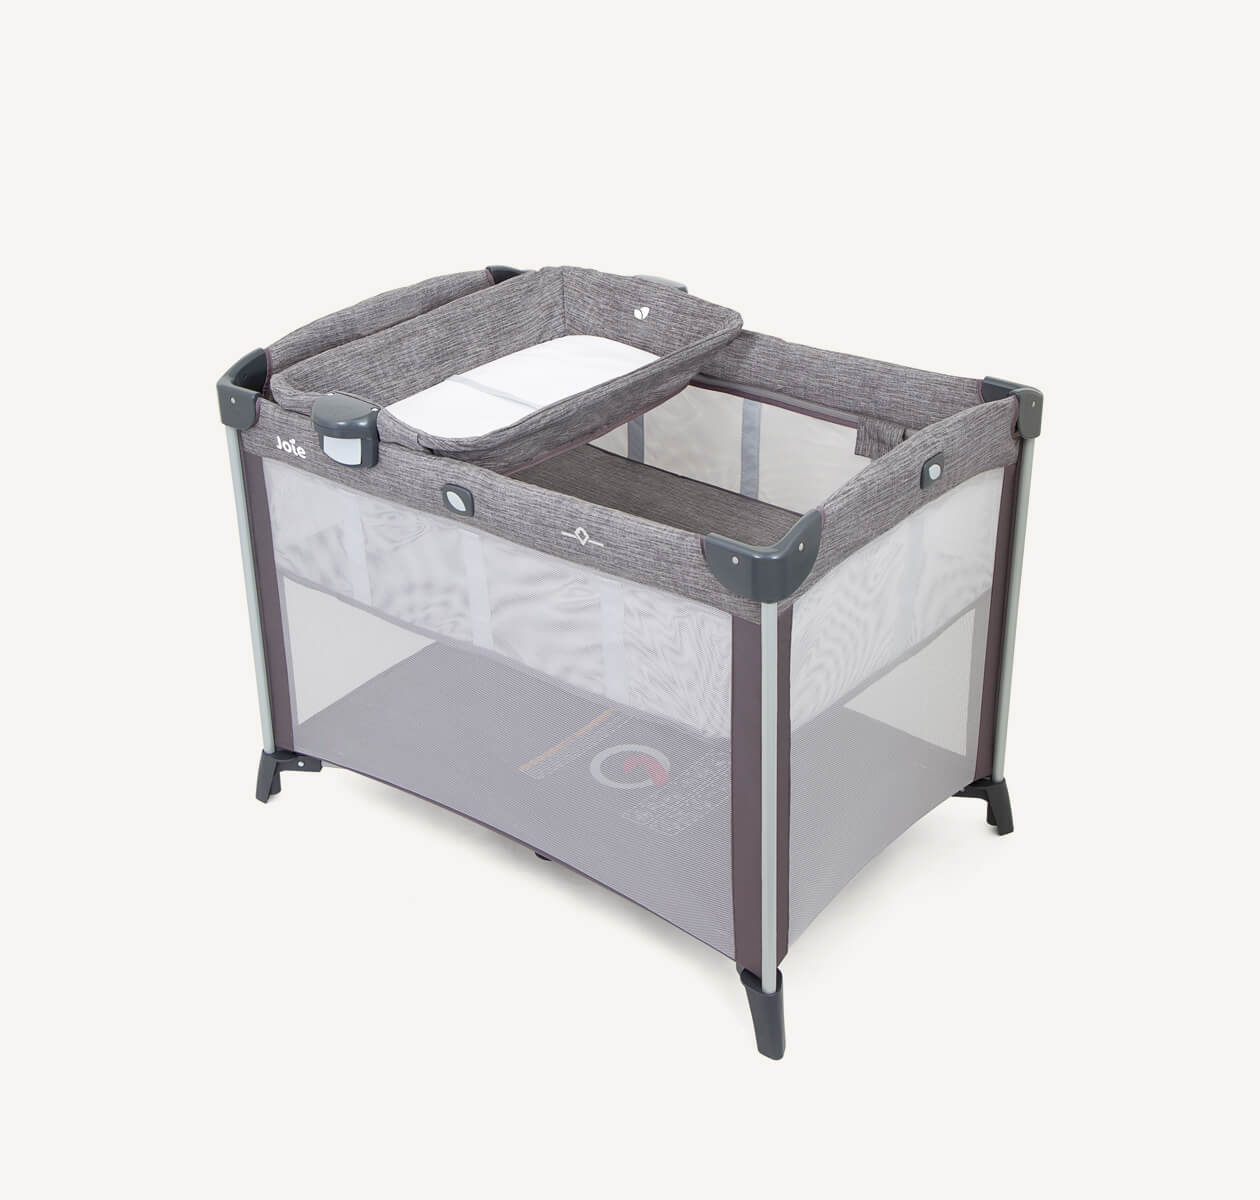 The Joie travel cot commuter change in grey with a bassinet and changer at a left angle.